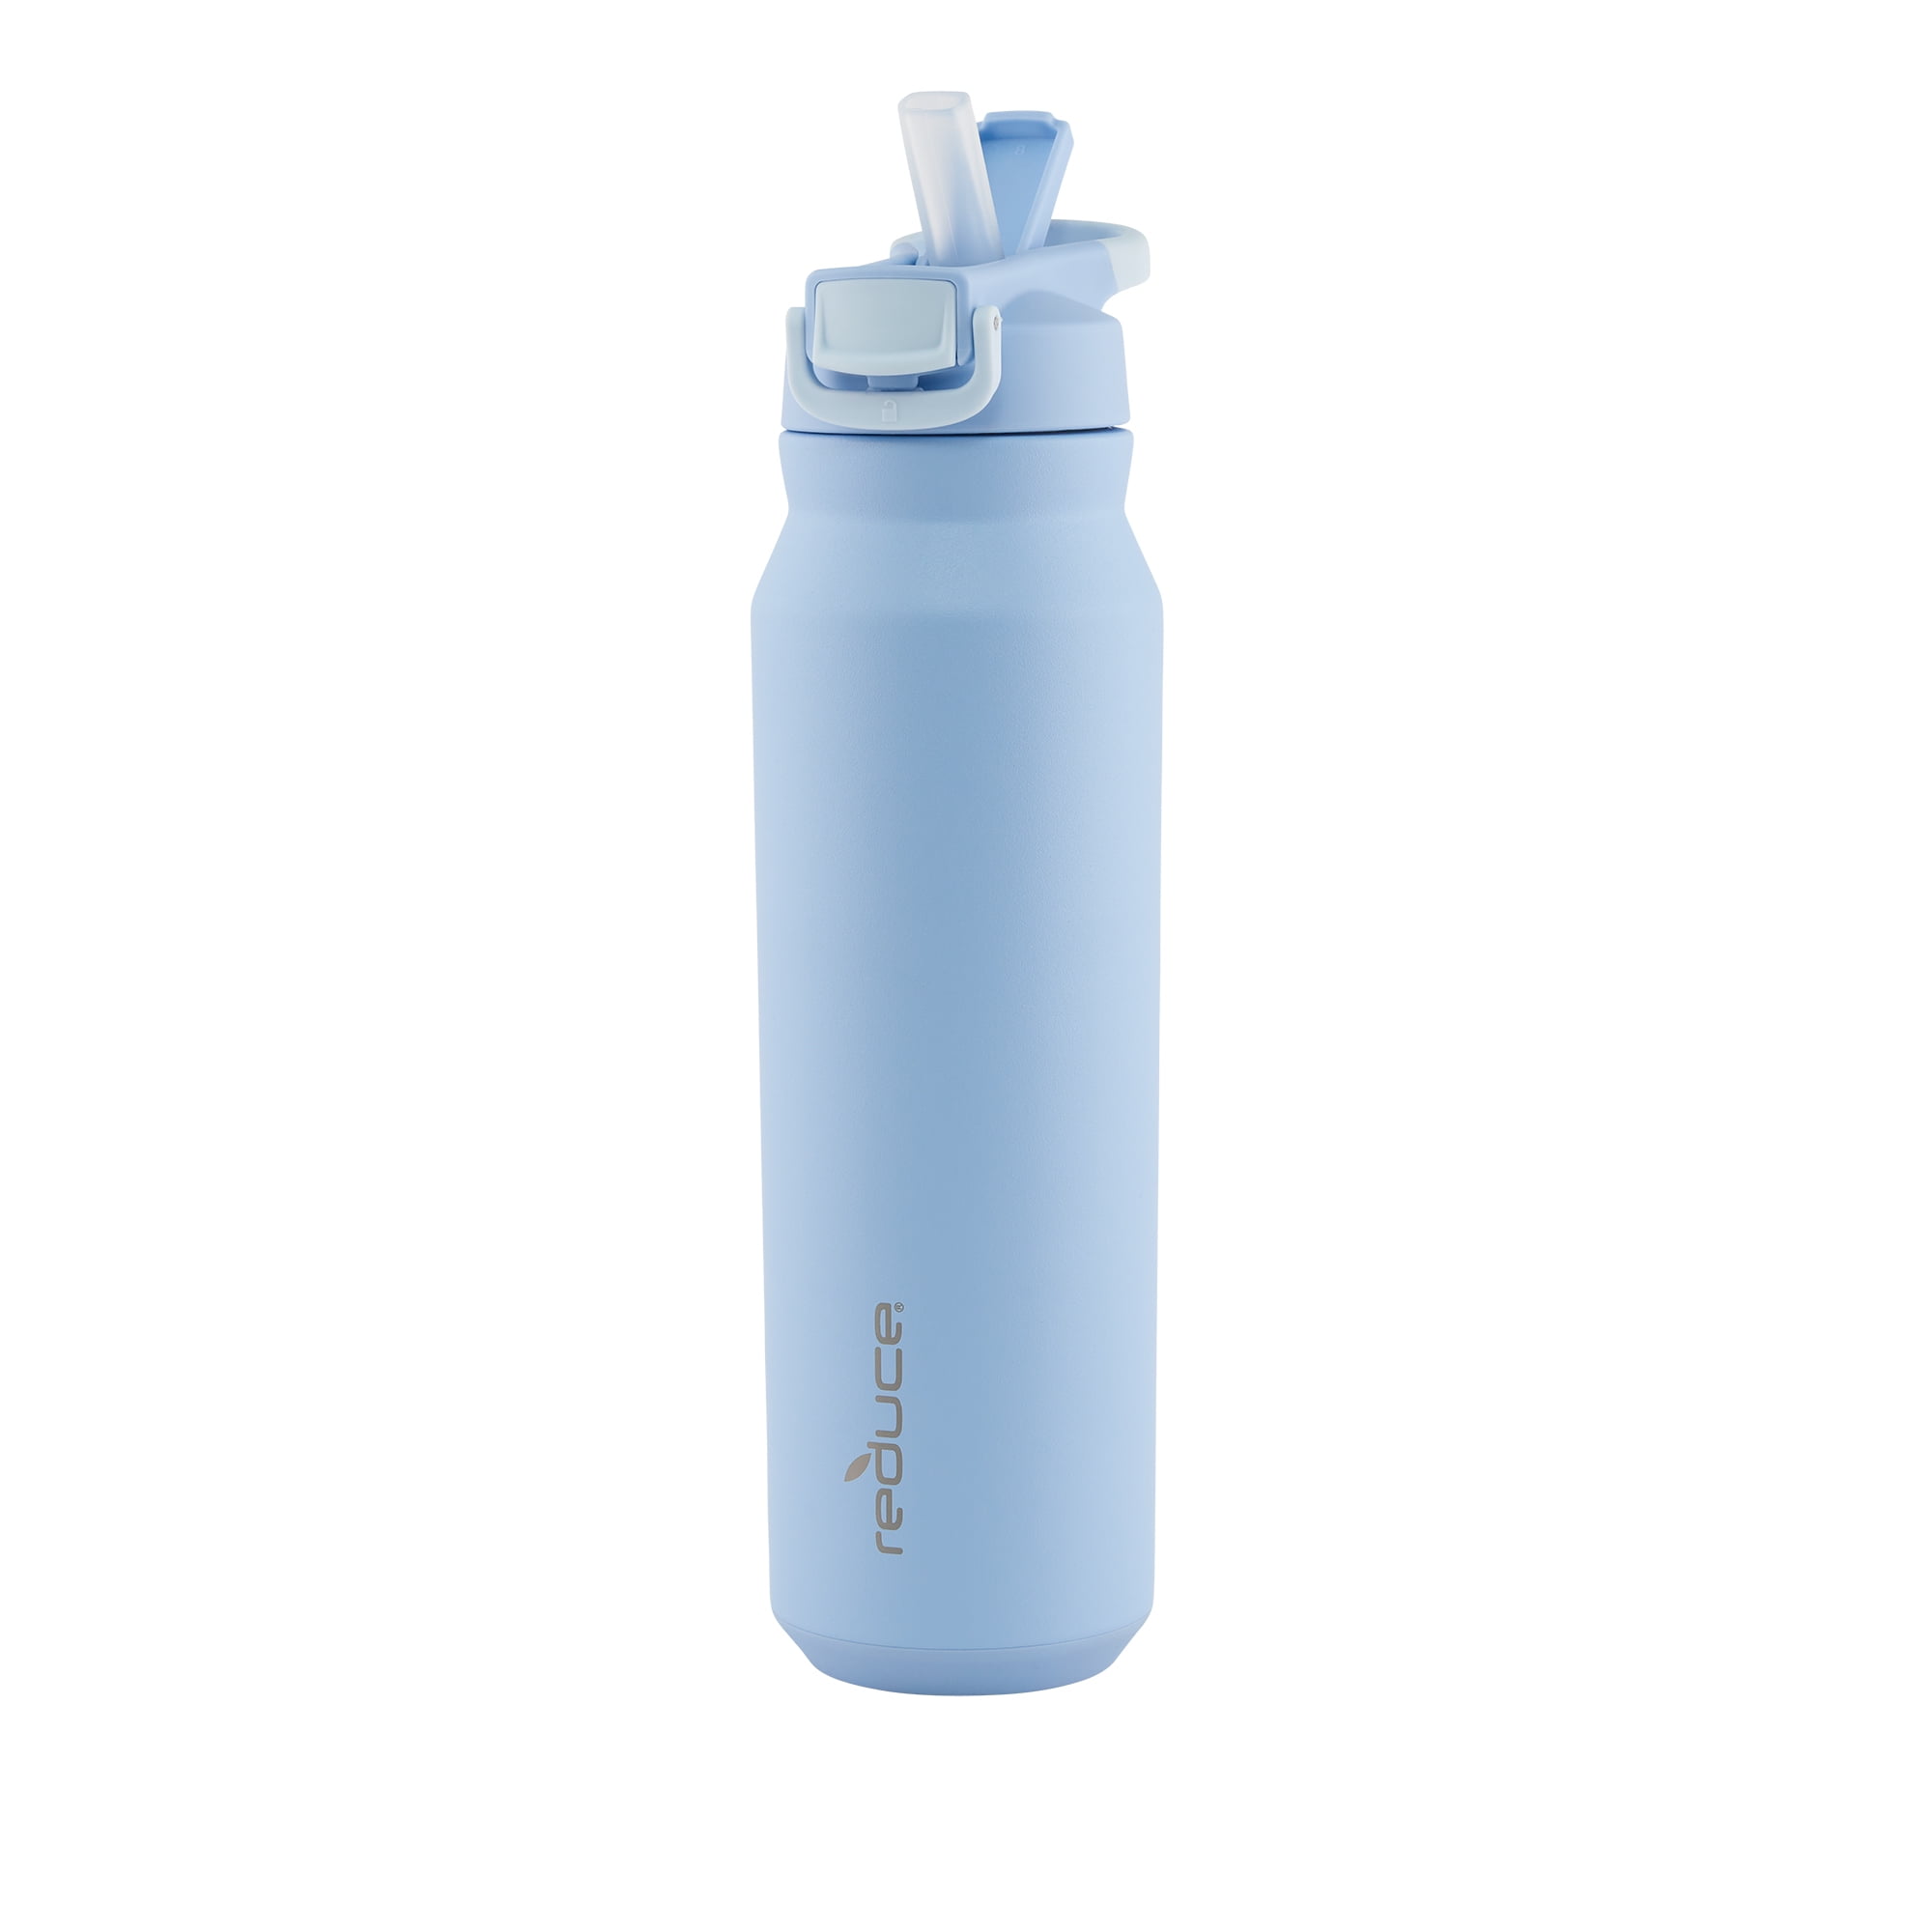 Virtue Stainless Steel 24Hr Cool Water Bottle - 24oz - Blue